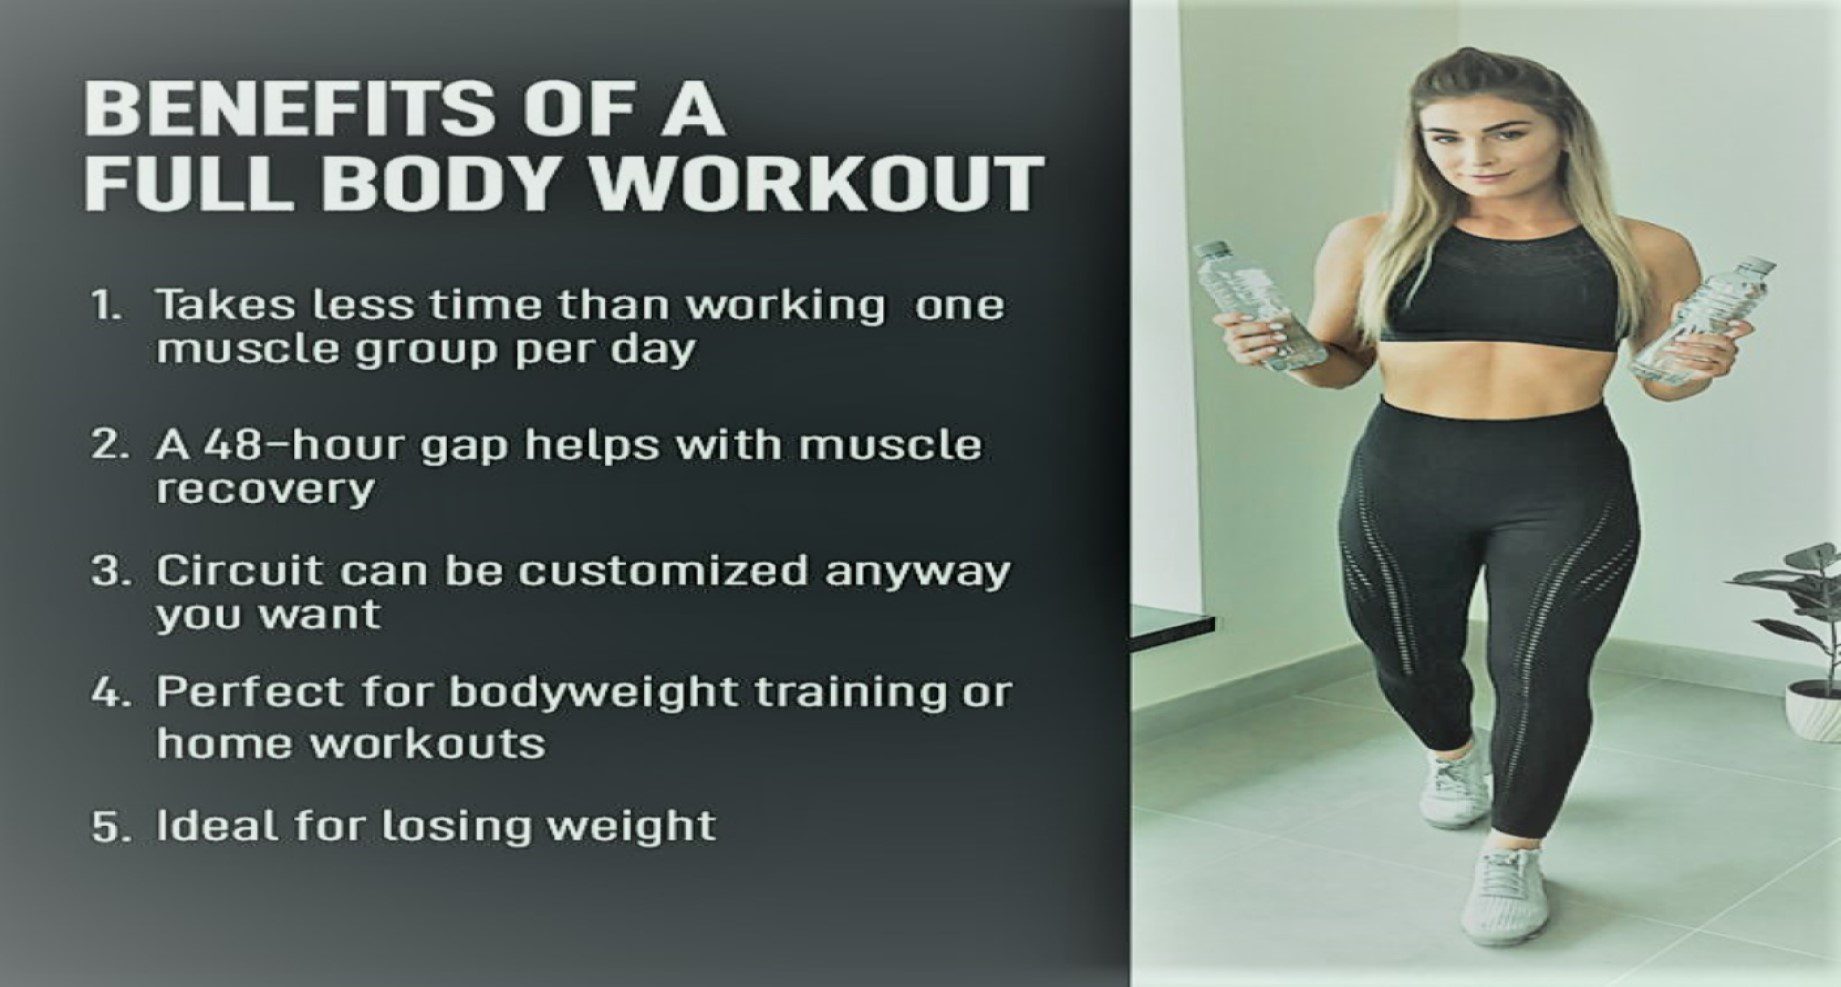 Benefits of a Full Body Workout